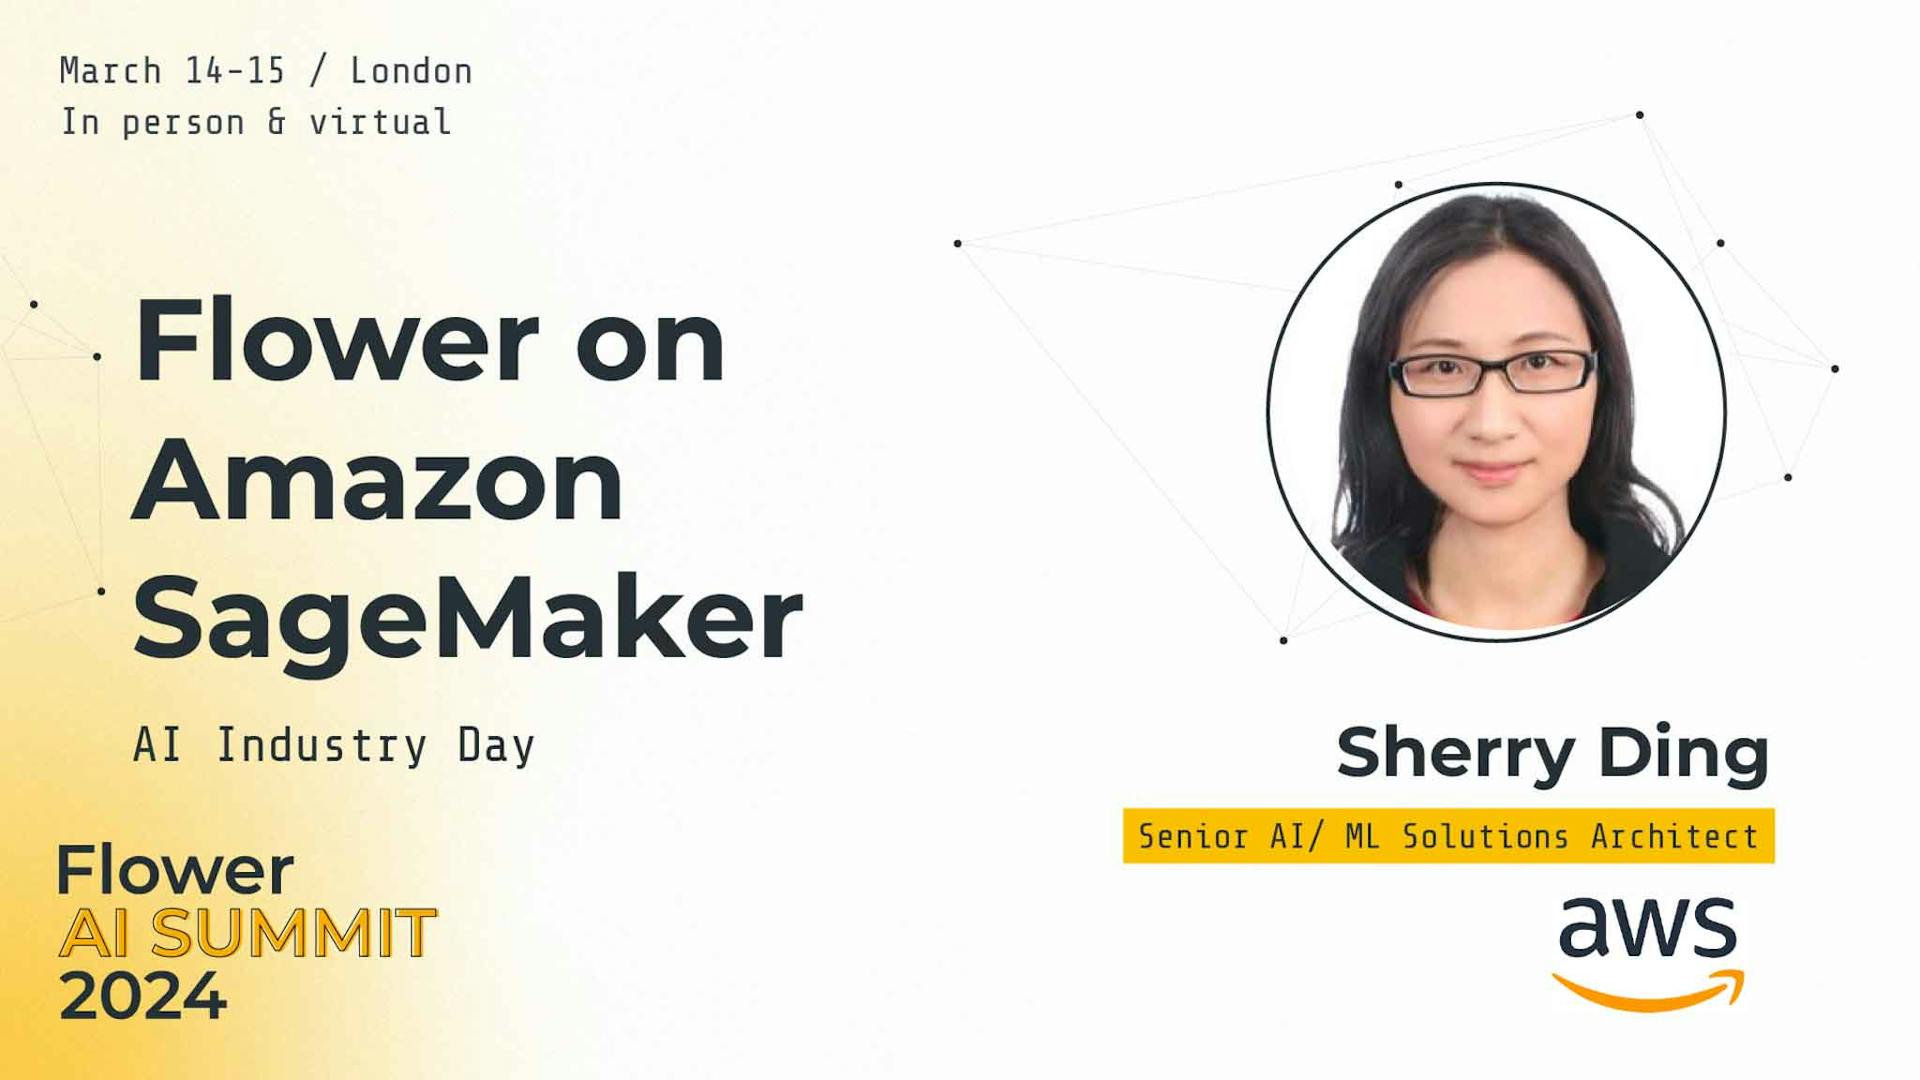 Flower on Amazon SageMaker, by Sherry Ding